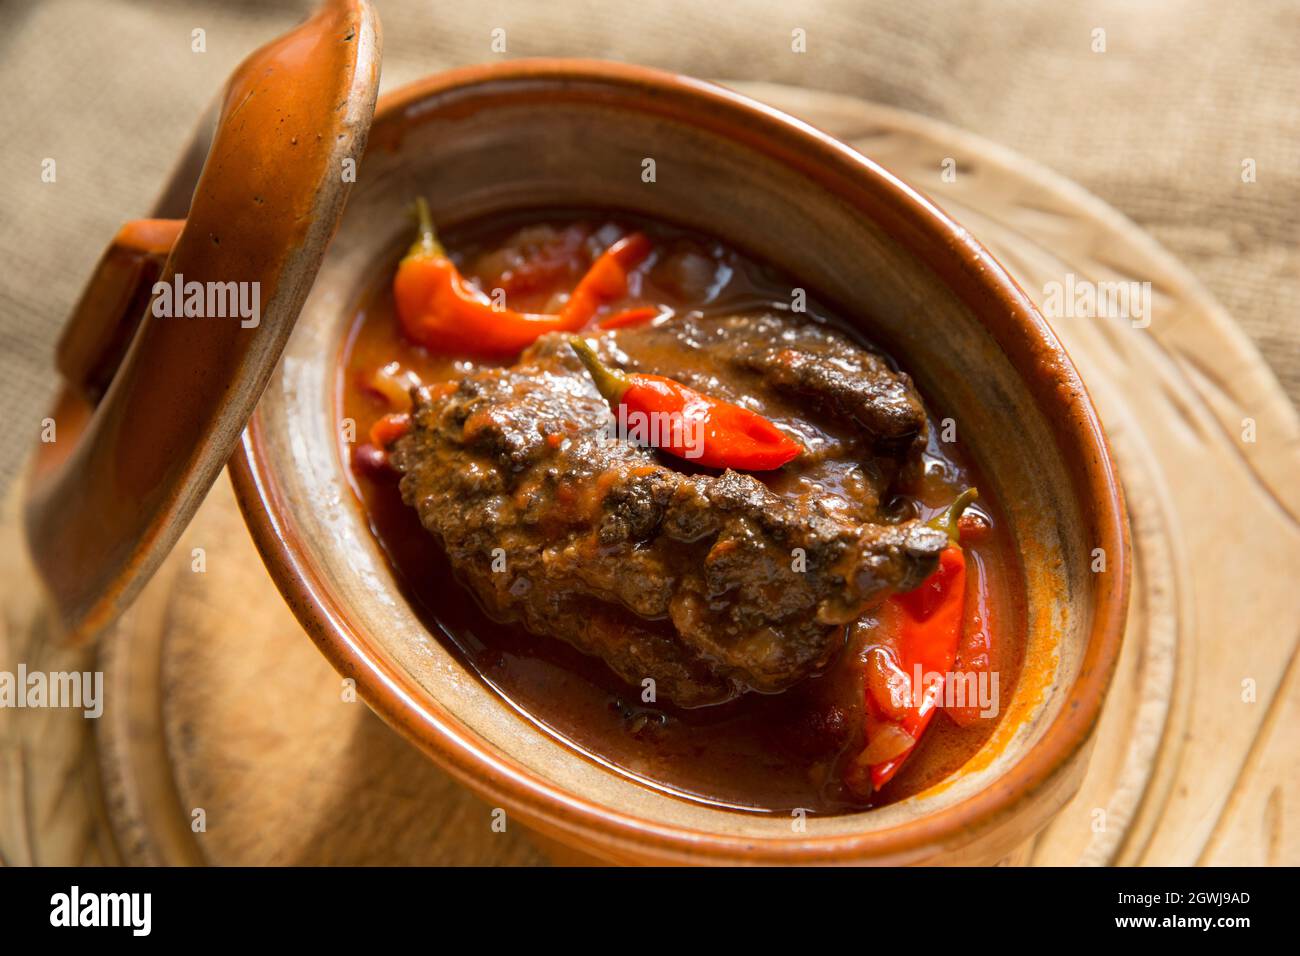 A stew made from slow cooked ox cheeks with vegetables, kidney beans and home grown chillies. England UK GB Stock Photo